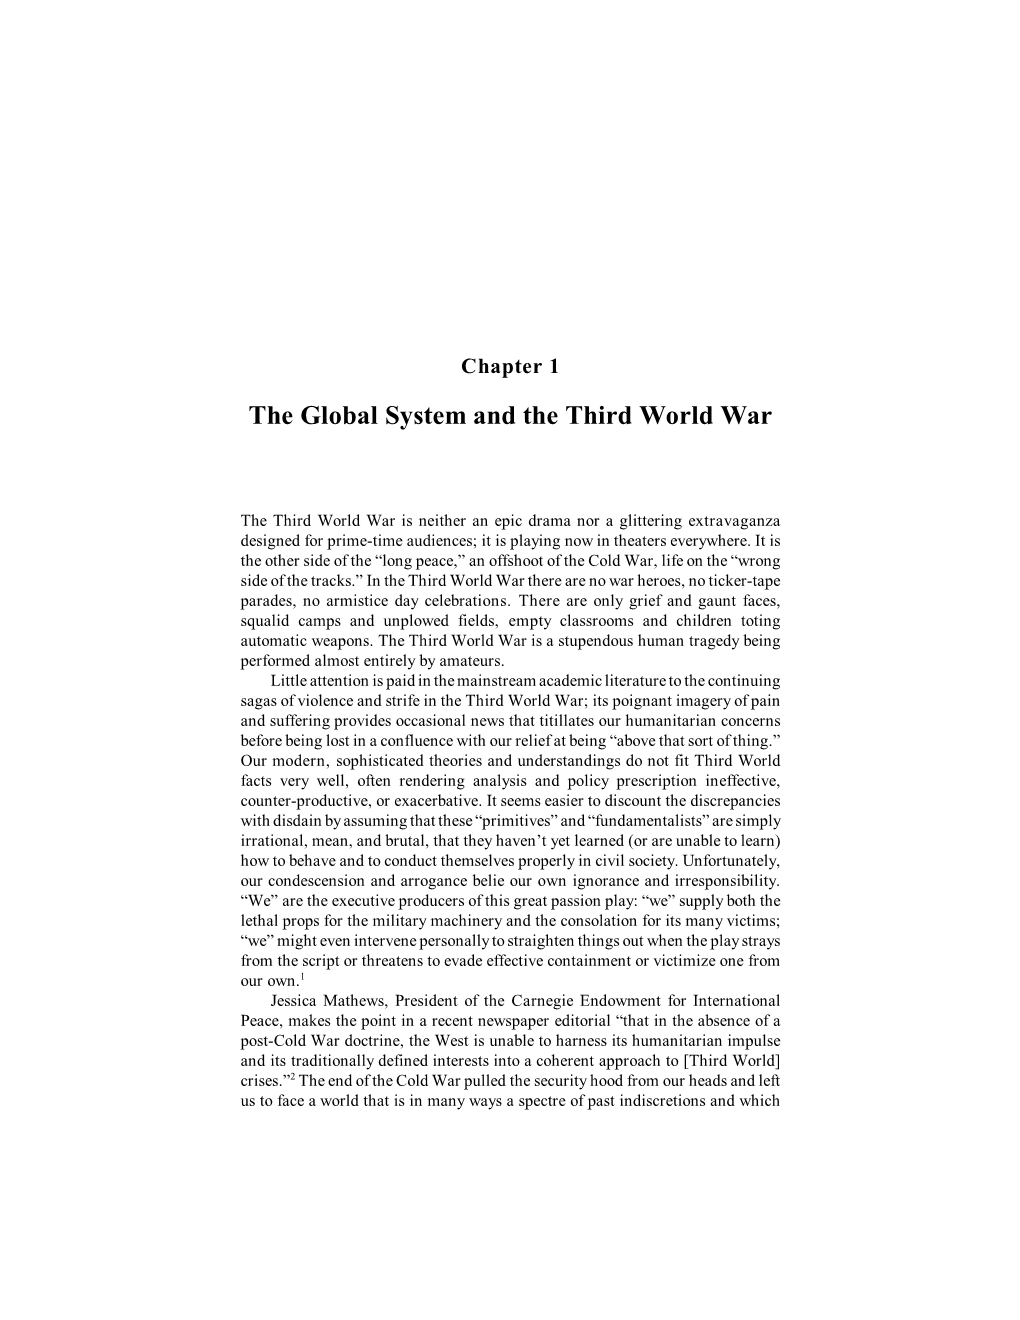 The Global System and the Third World War